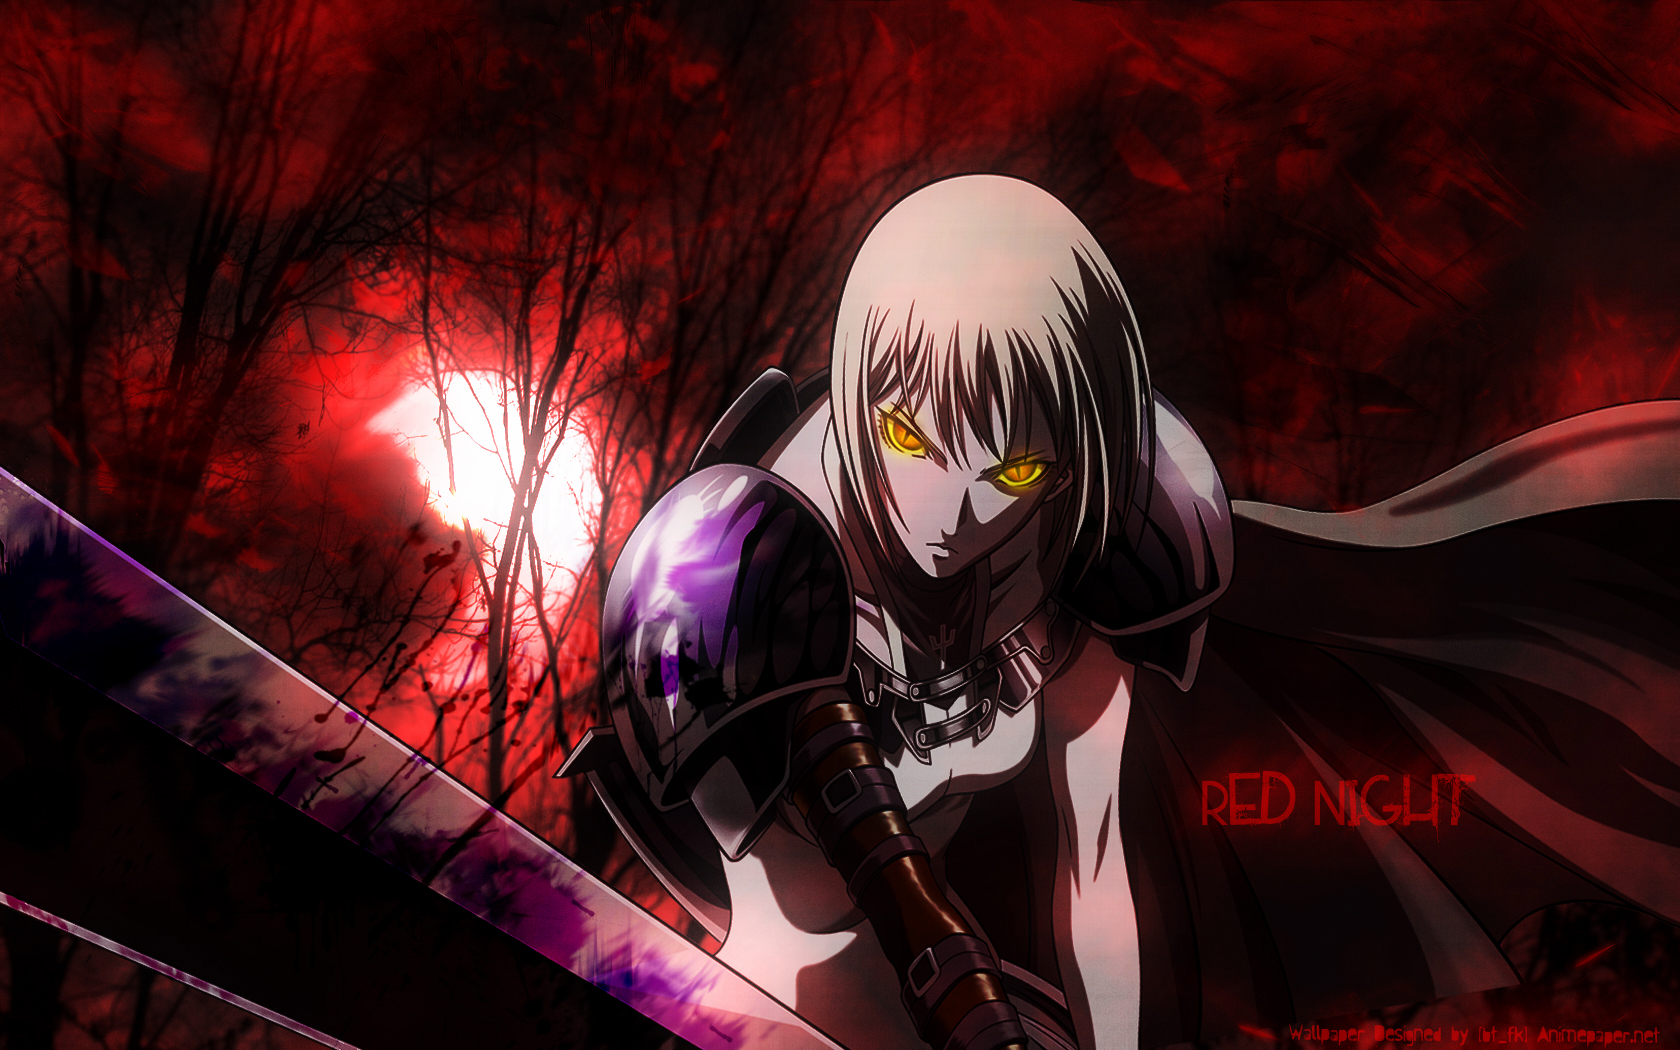 Claymore Anime Wallpapers